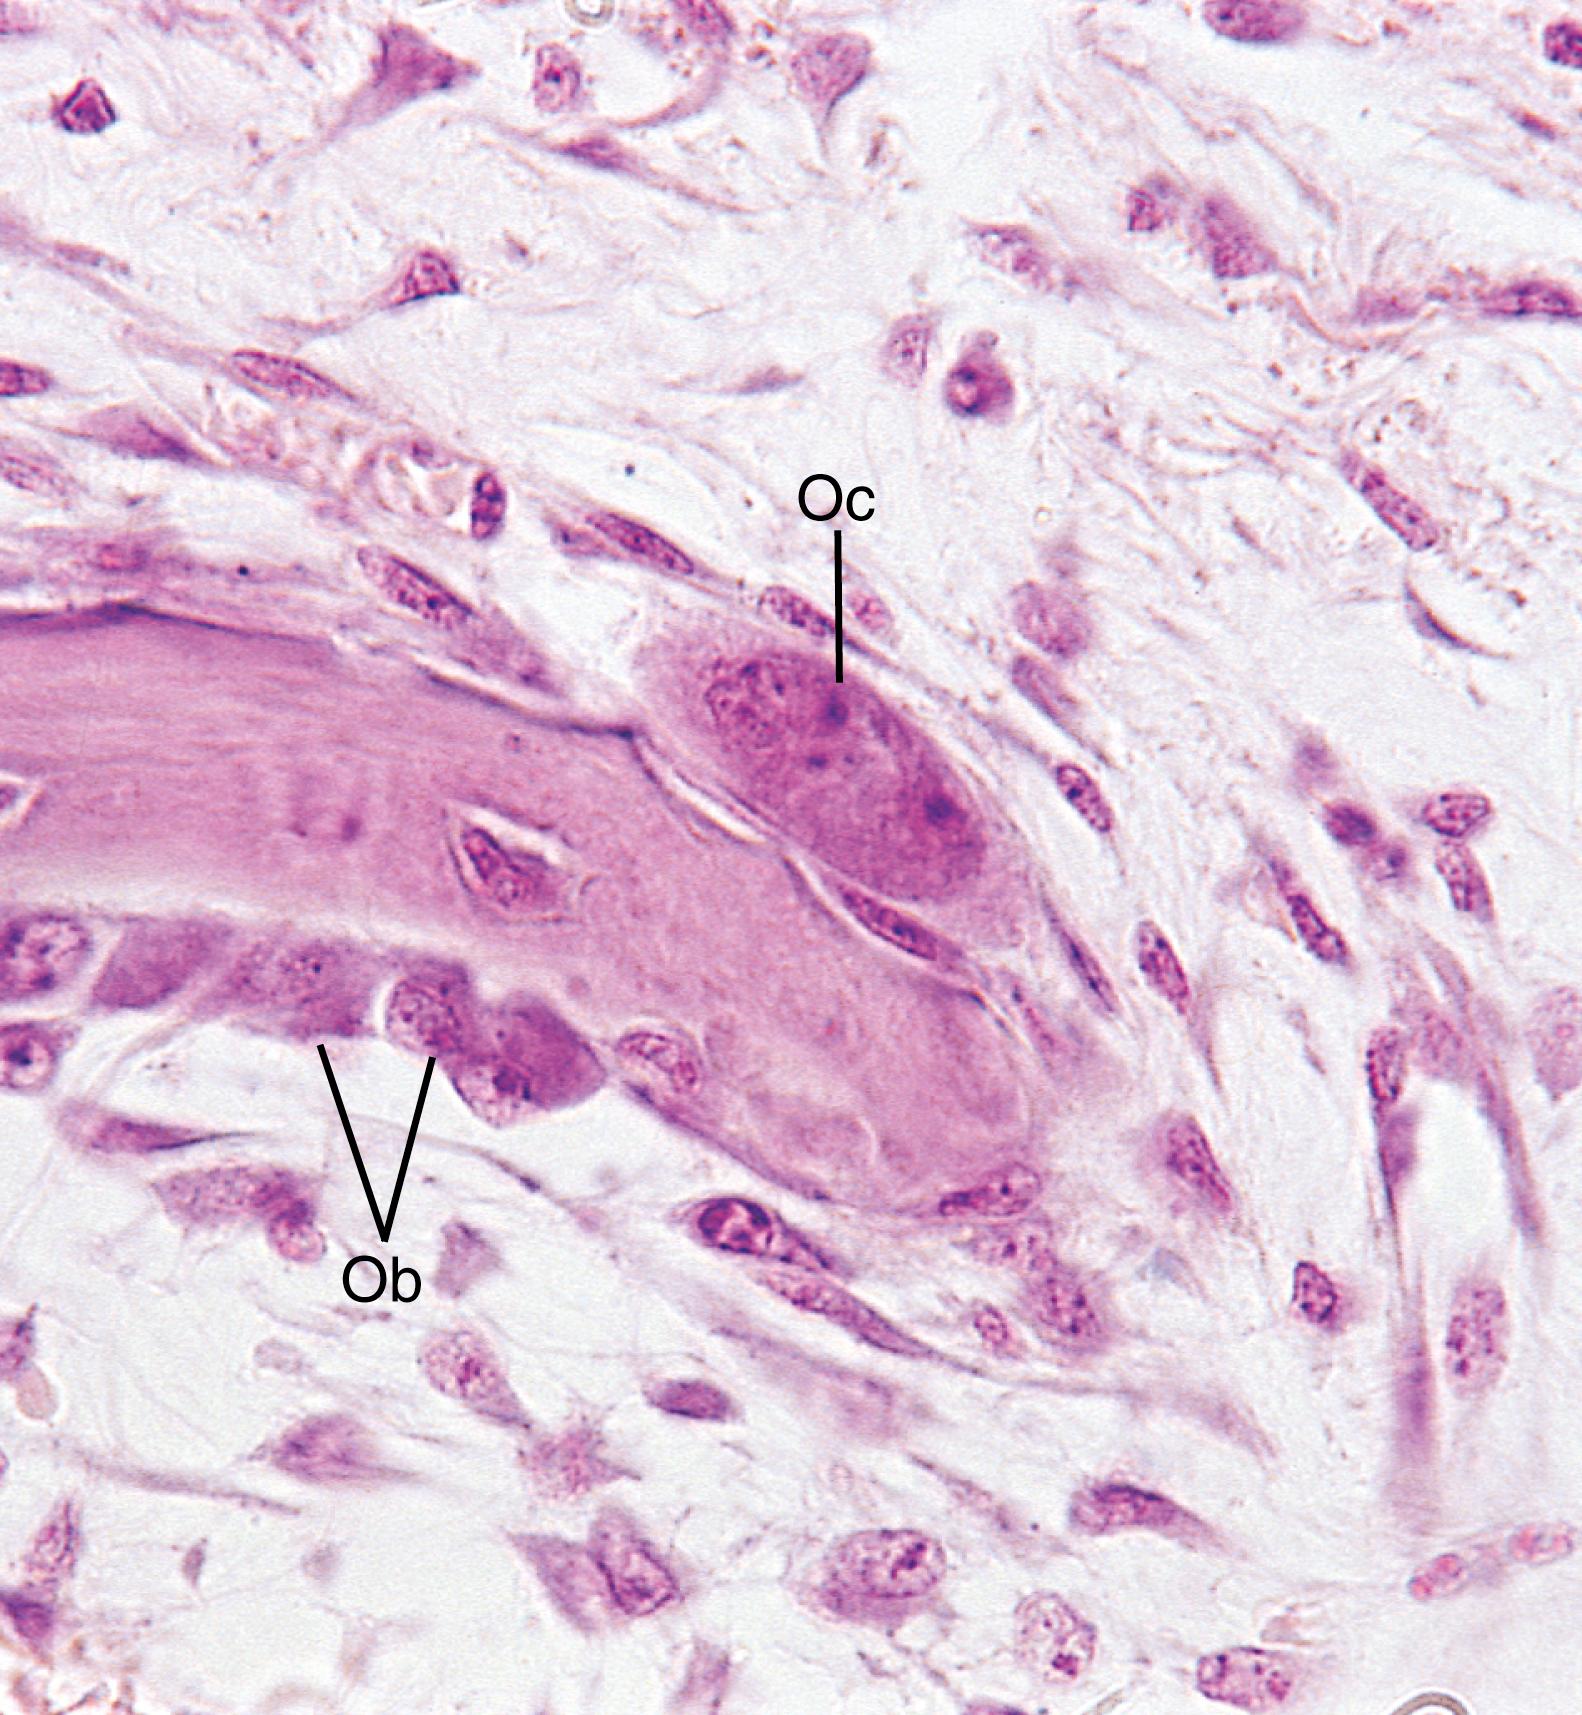 Fig. 7.10, Light micrograph of intramembranous ossification (×540). Osteoblasts (Ob) line the bony spicule, where they are secreting osteoid onto the bone. Osteoclasts (Oc) may be observed housed in a Howship lacuna.